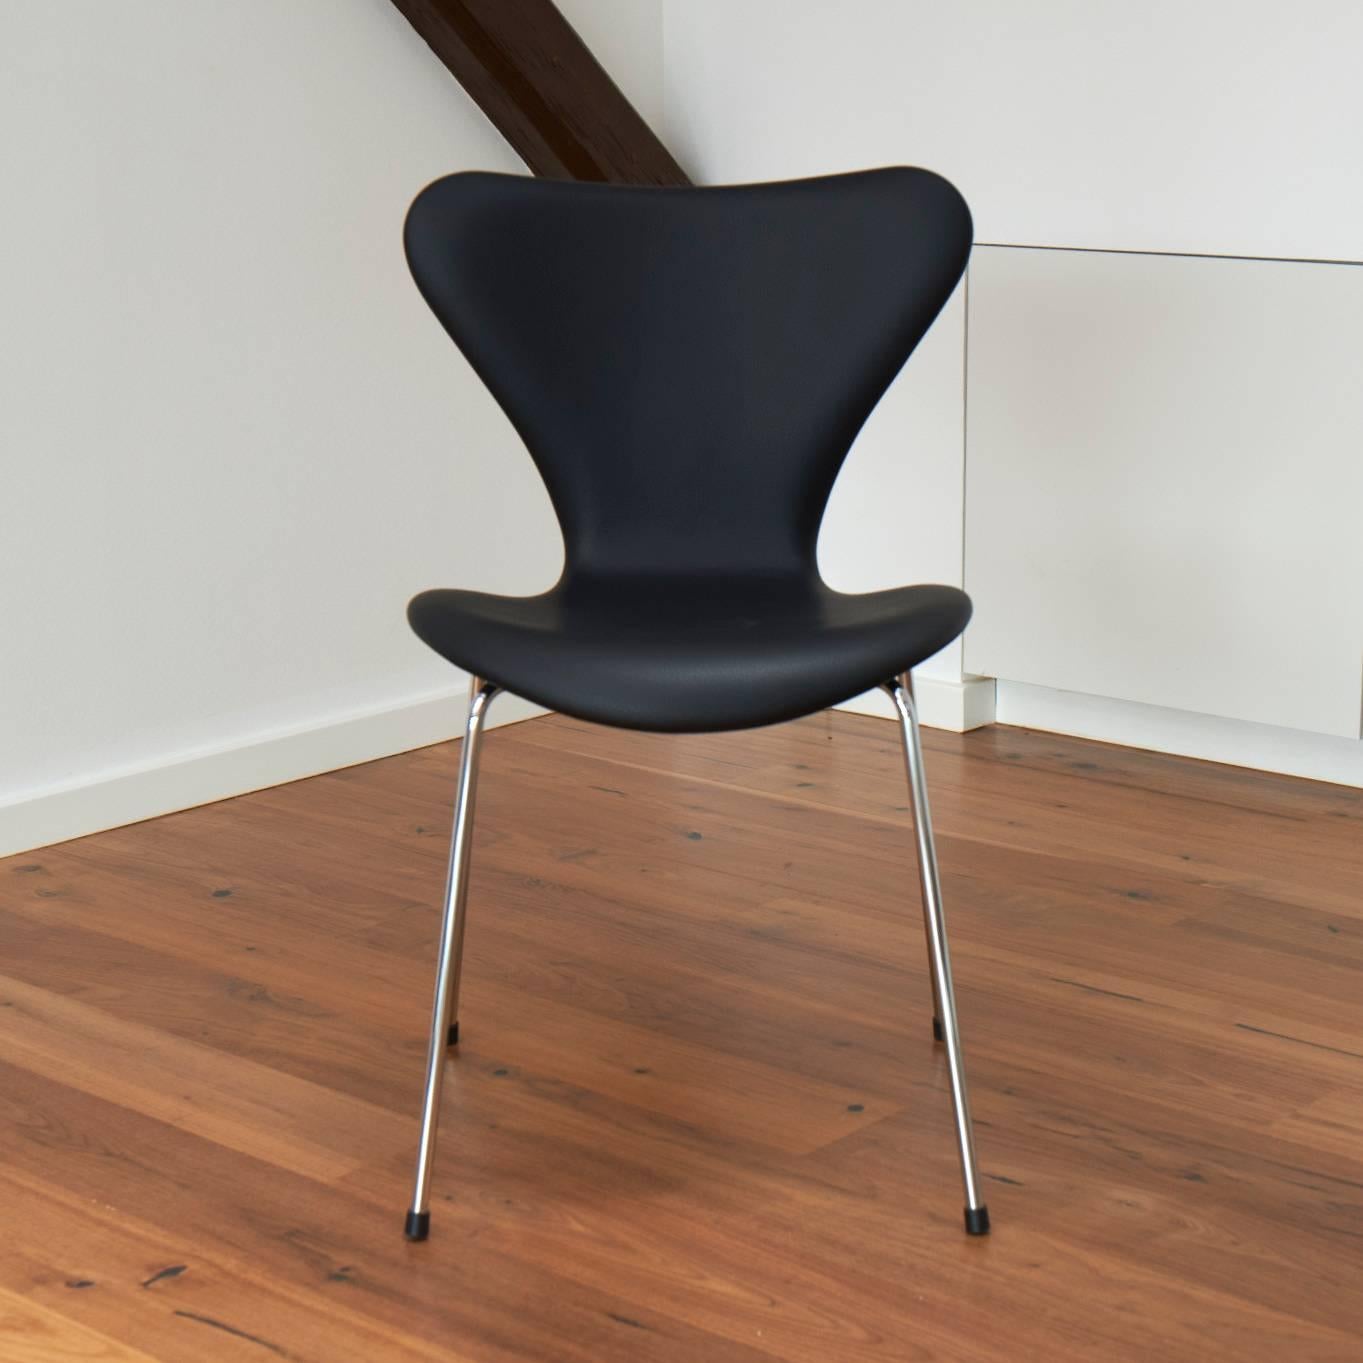 Six pieces new Arne Jacobsen 3107 chairs in black classic leather. 
Manufactured by Fritz Hansen